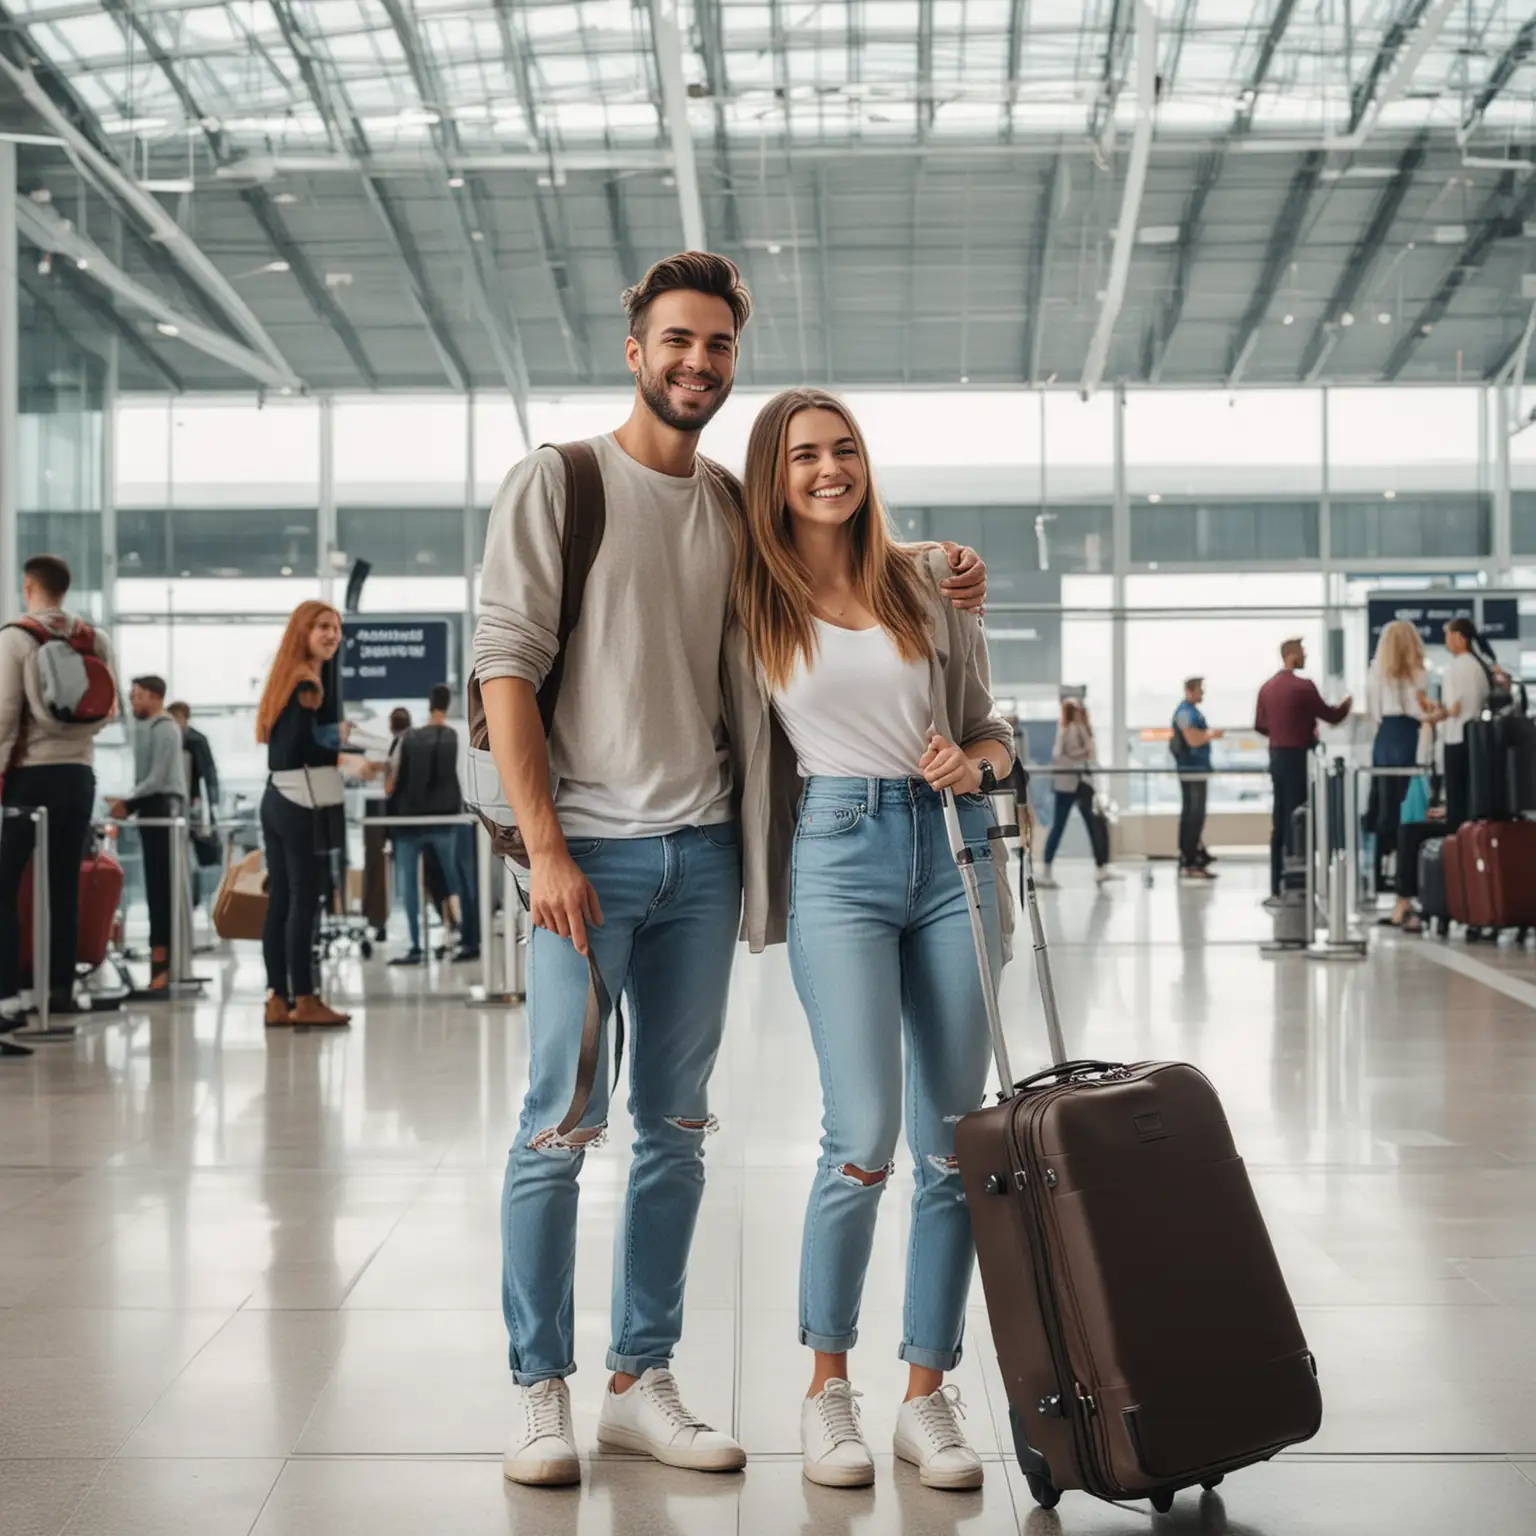 Young Couple Smiling in Modern Airport Departure Hall with Luggage